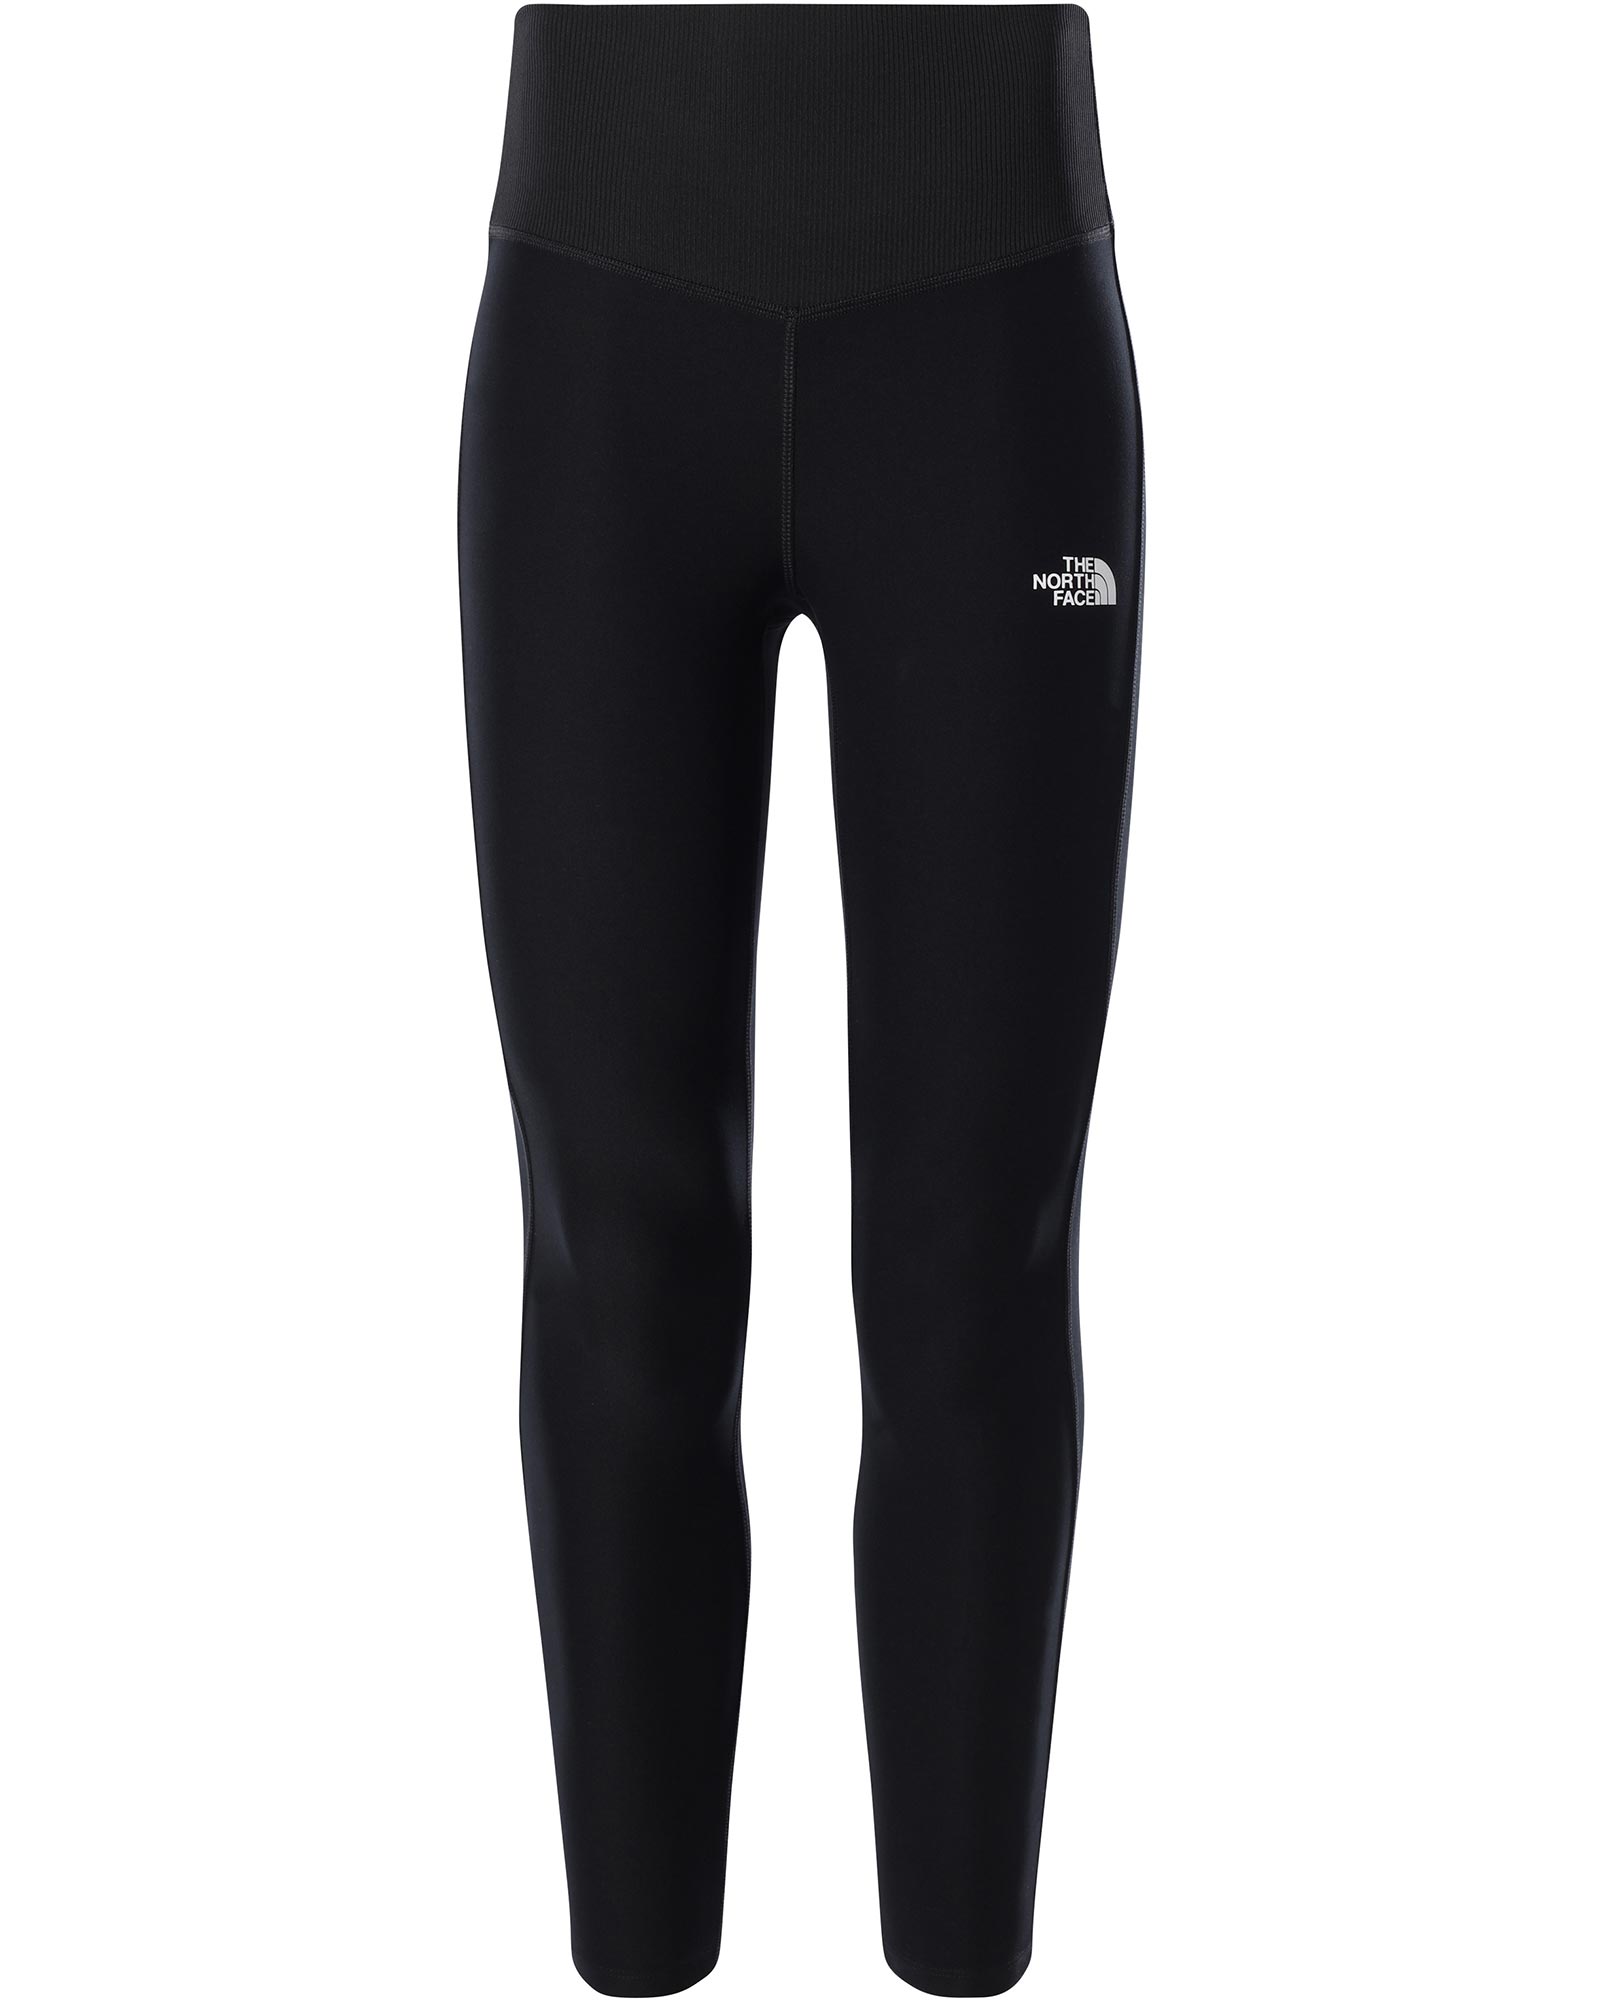 The North Face Dune Sky Womens 7/8 Tights